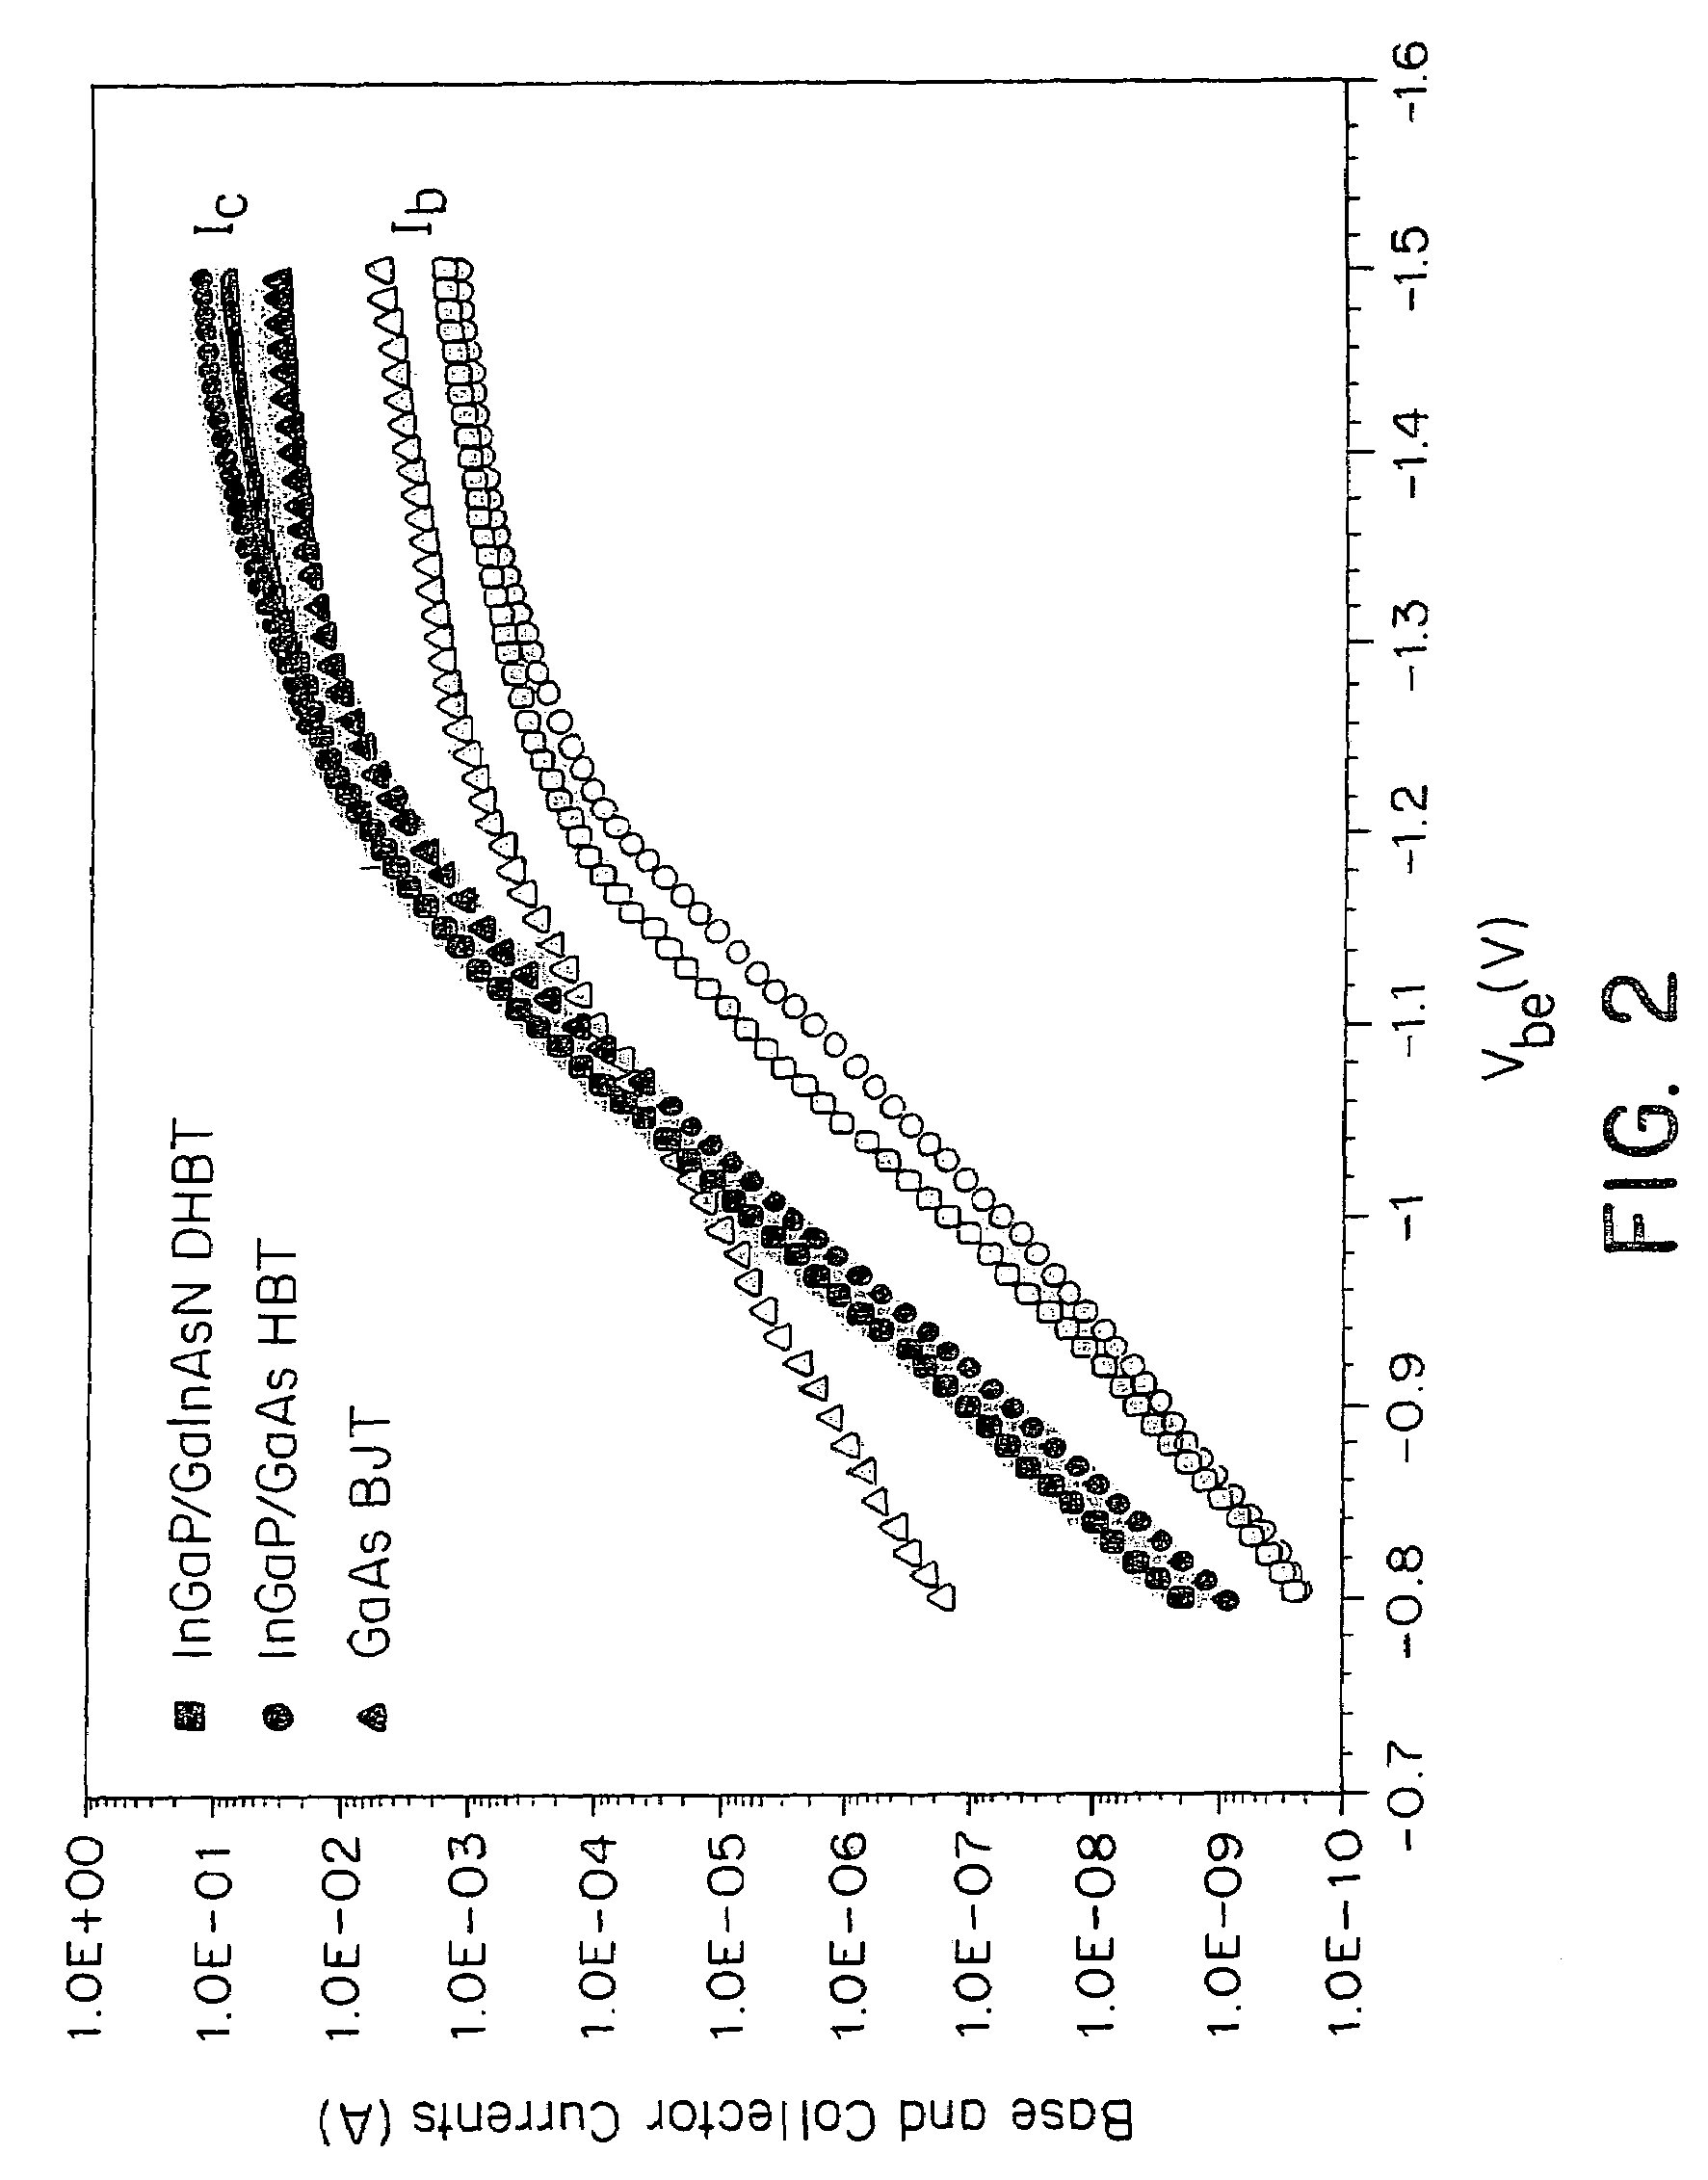 Bipolar transistor with lattice matched base layer